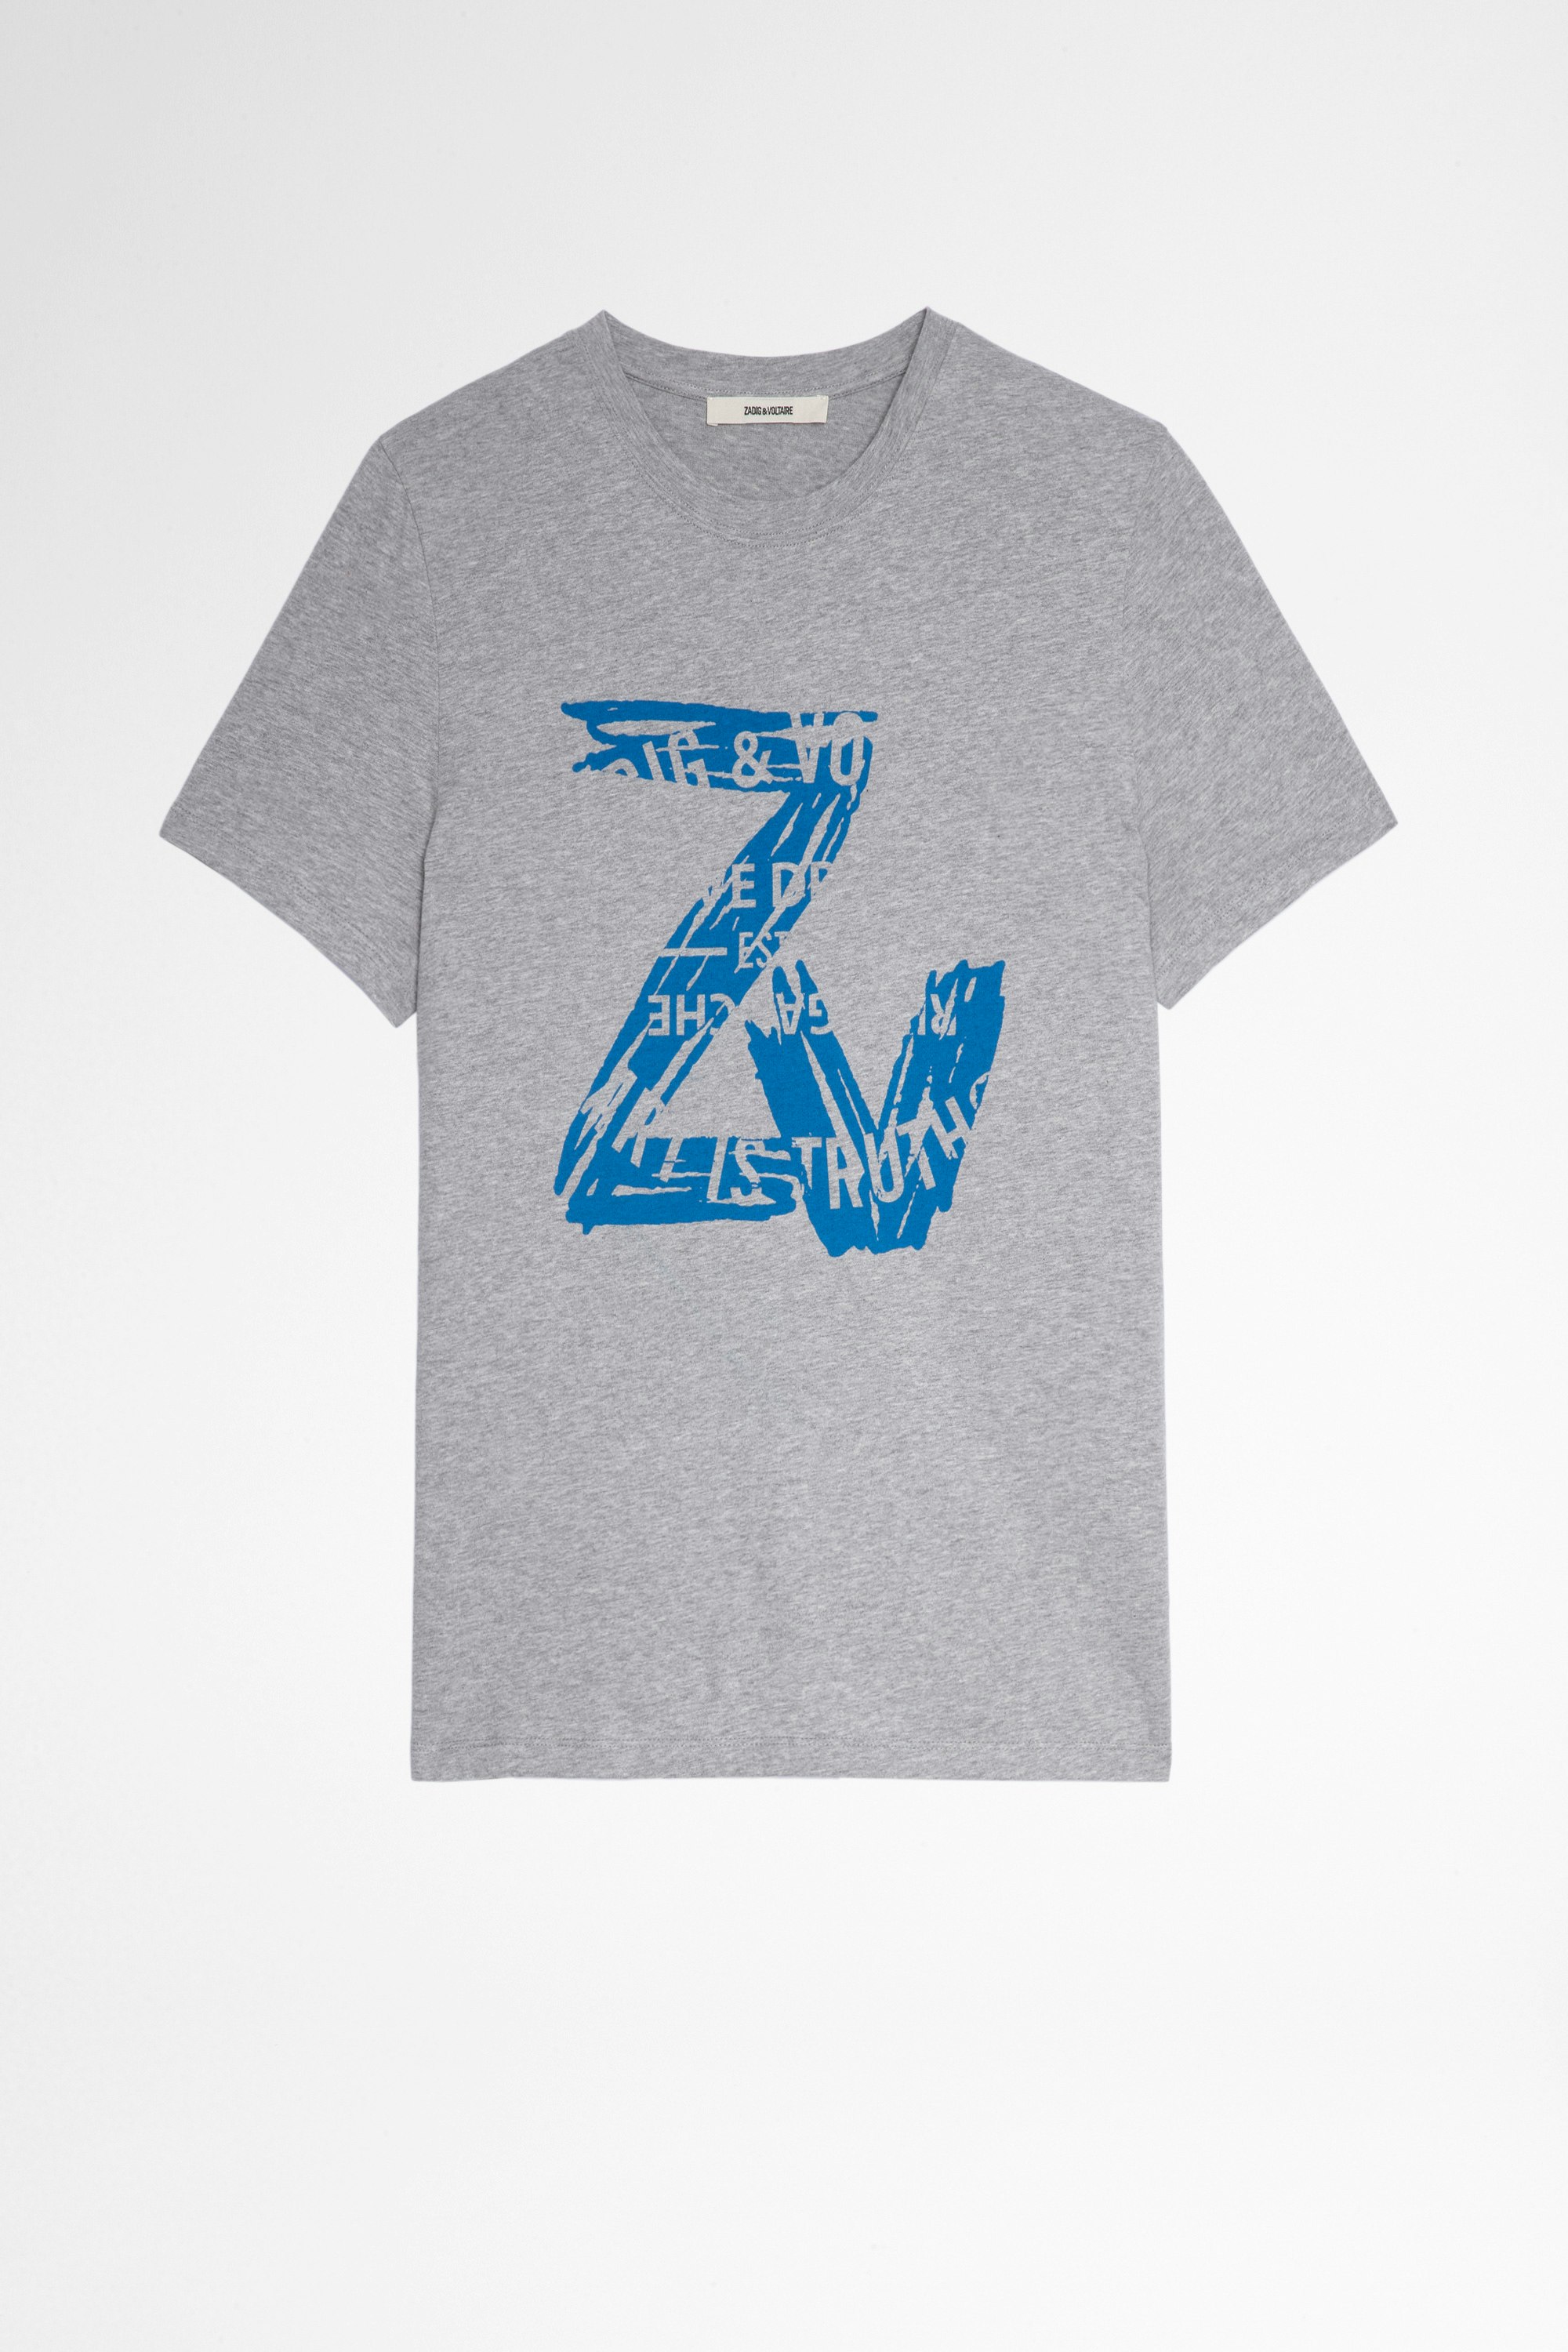 Tommy T-Shirt Men's grey cotton t-shirt with ZV print